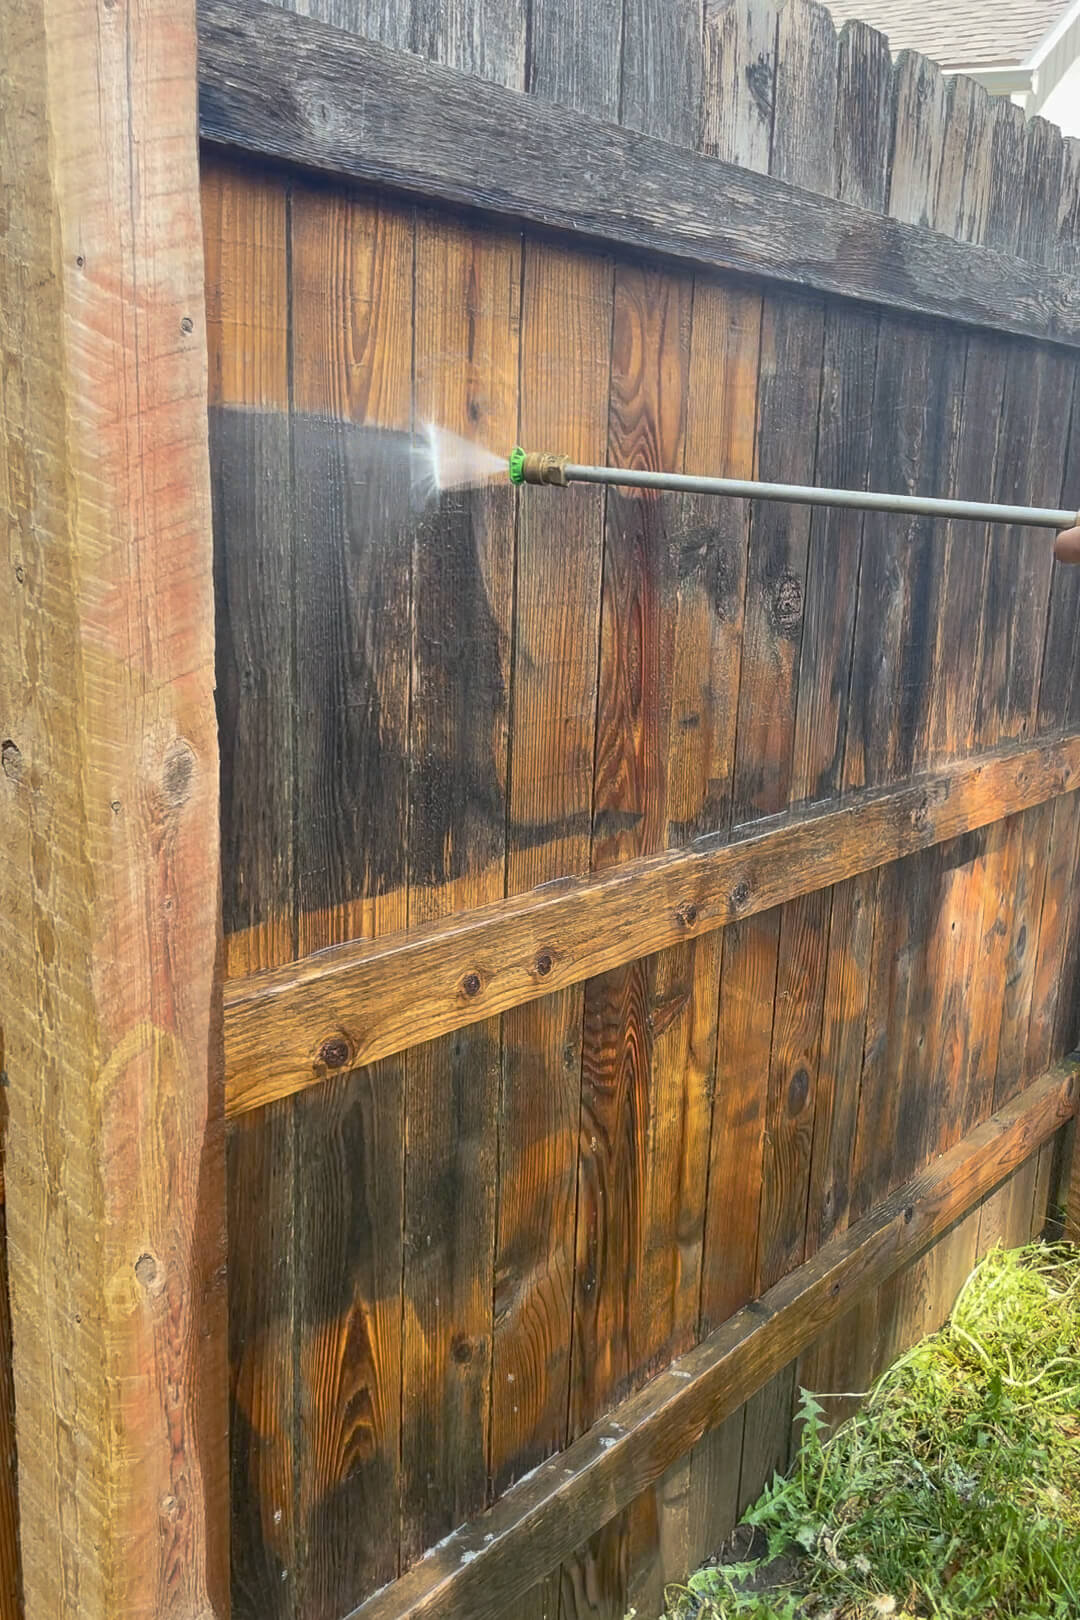 Pressure washing an old wood fence.